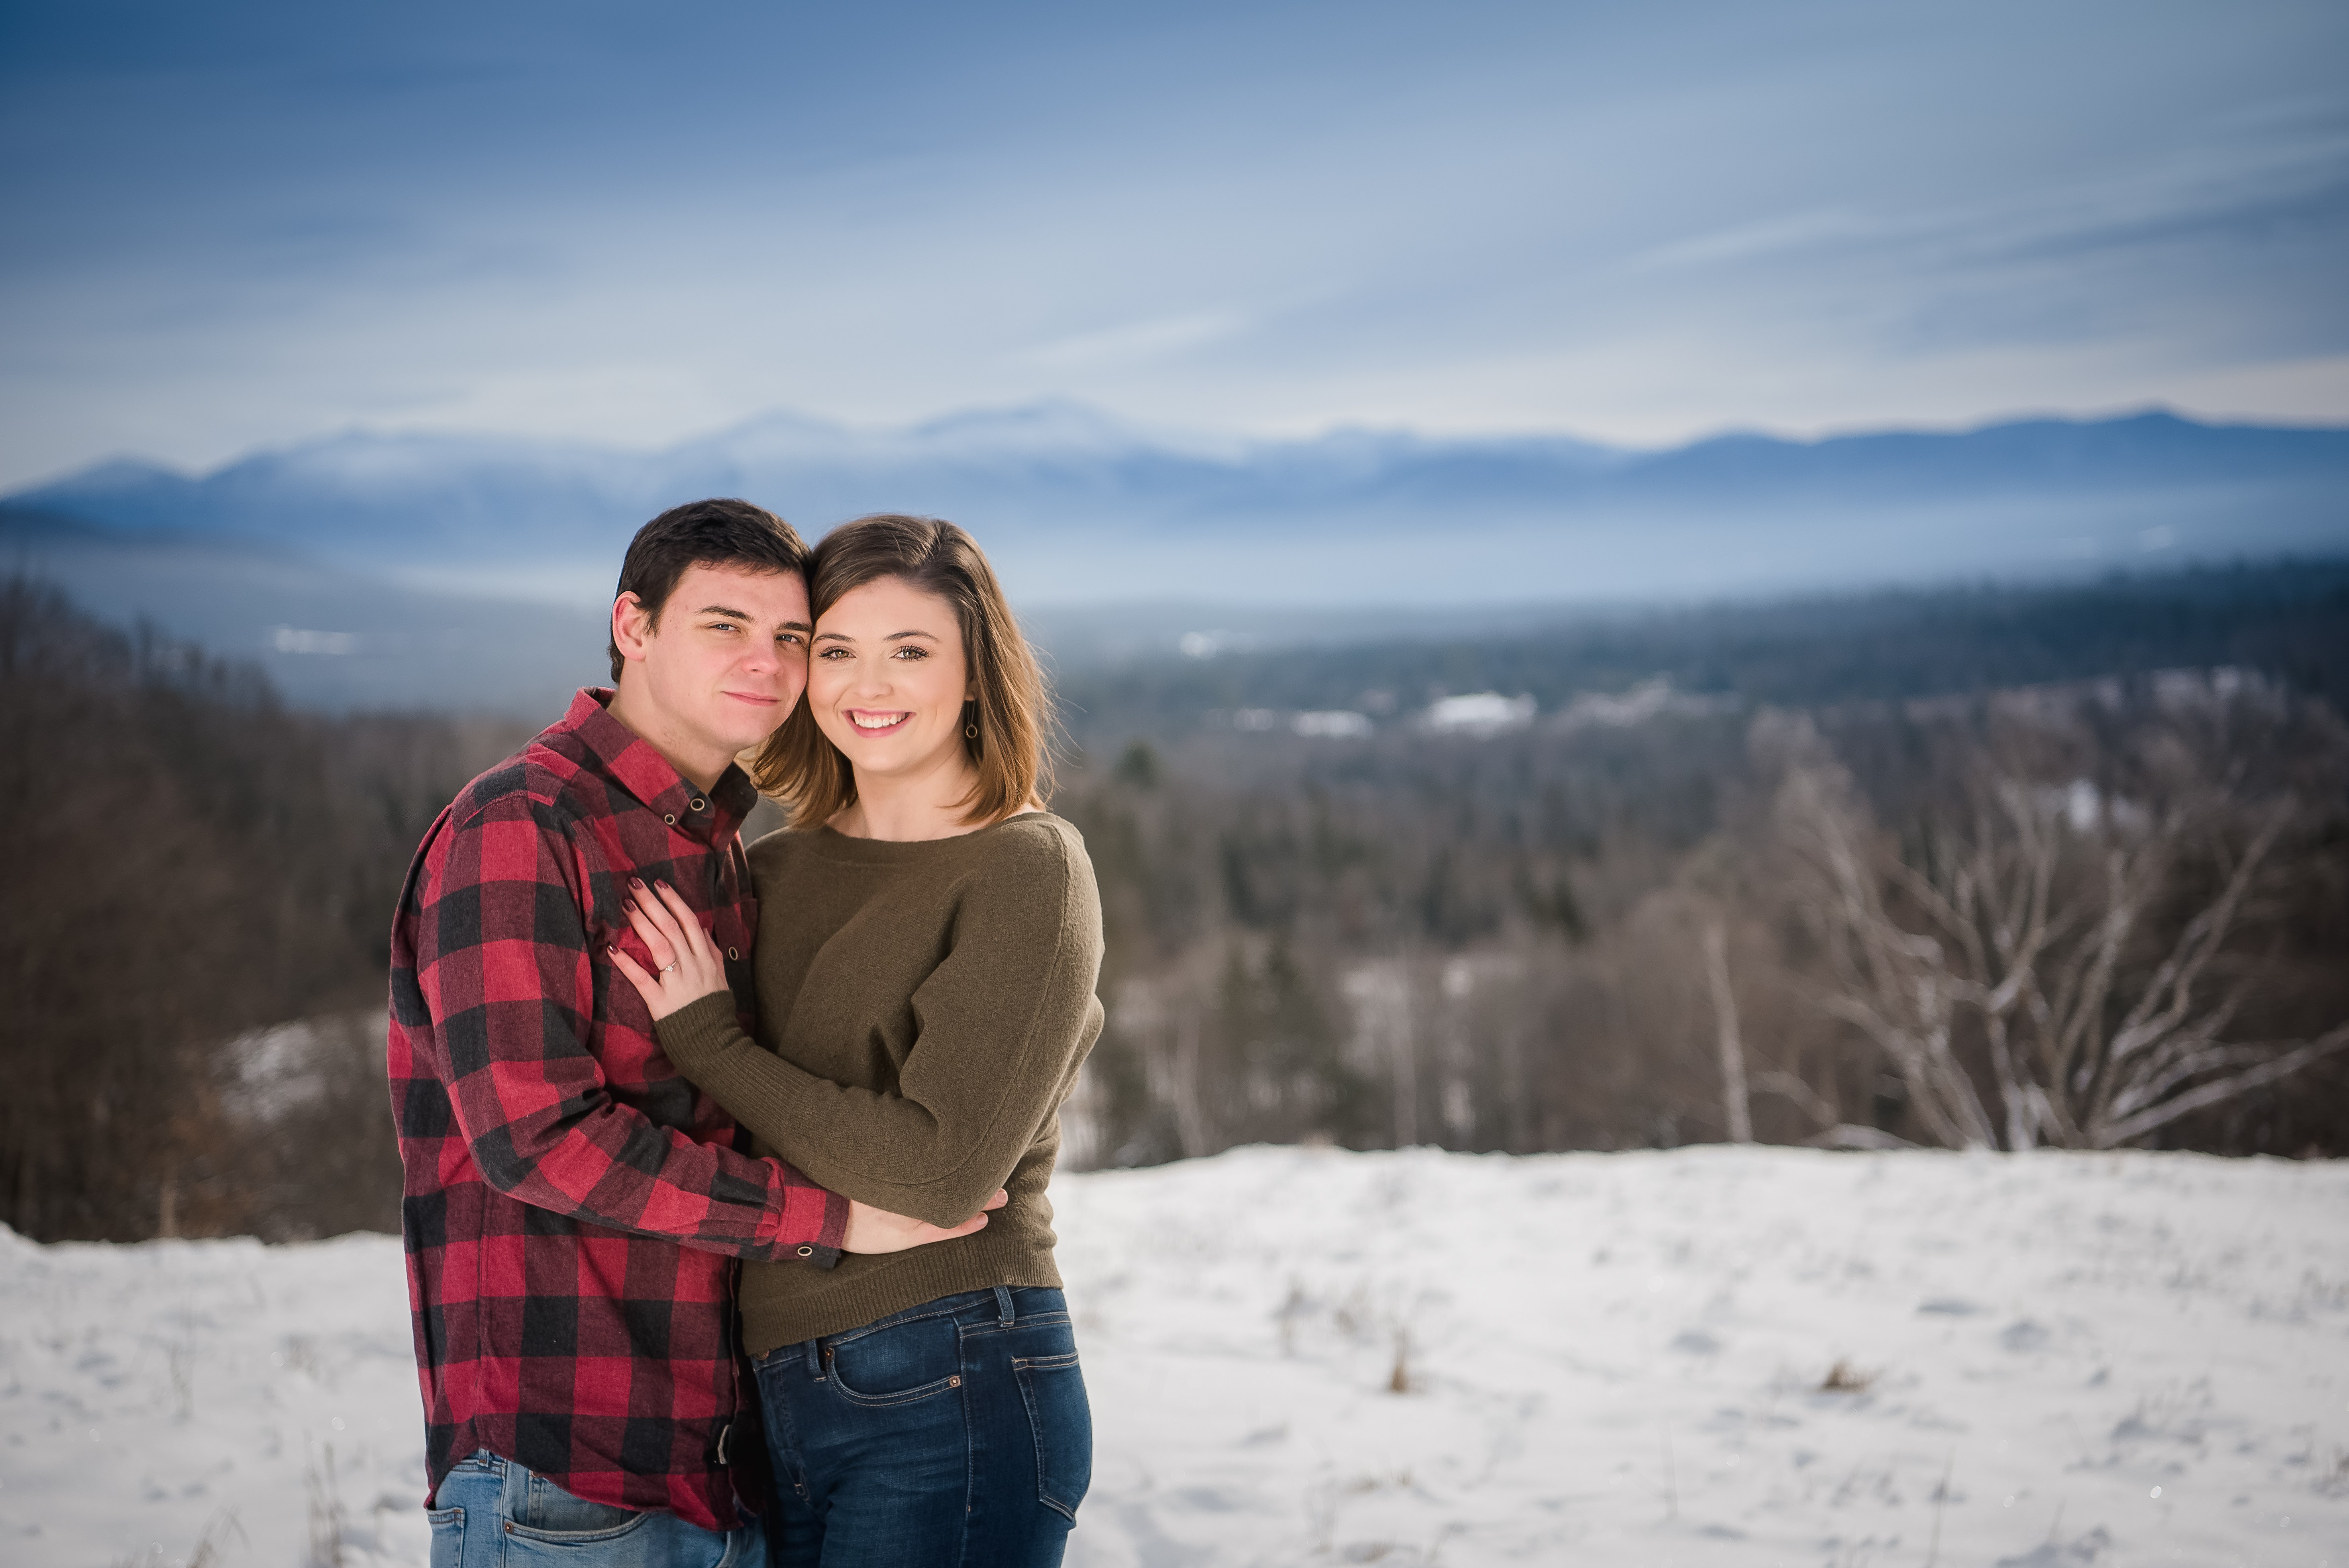 Engagement Photography - Engagement + Couples Photography